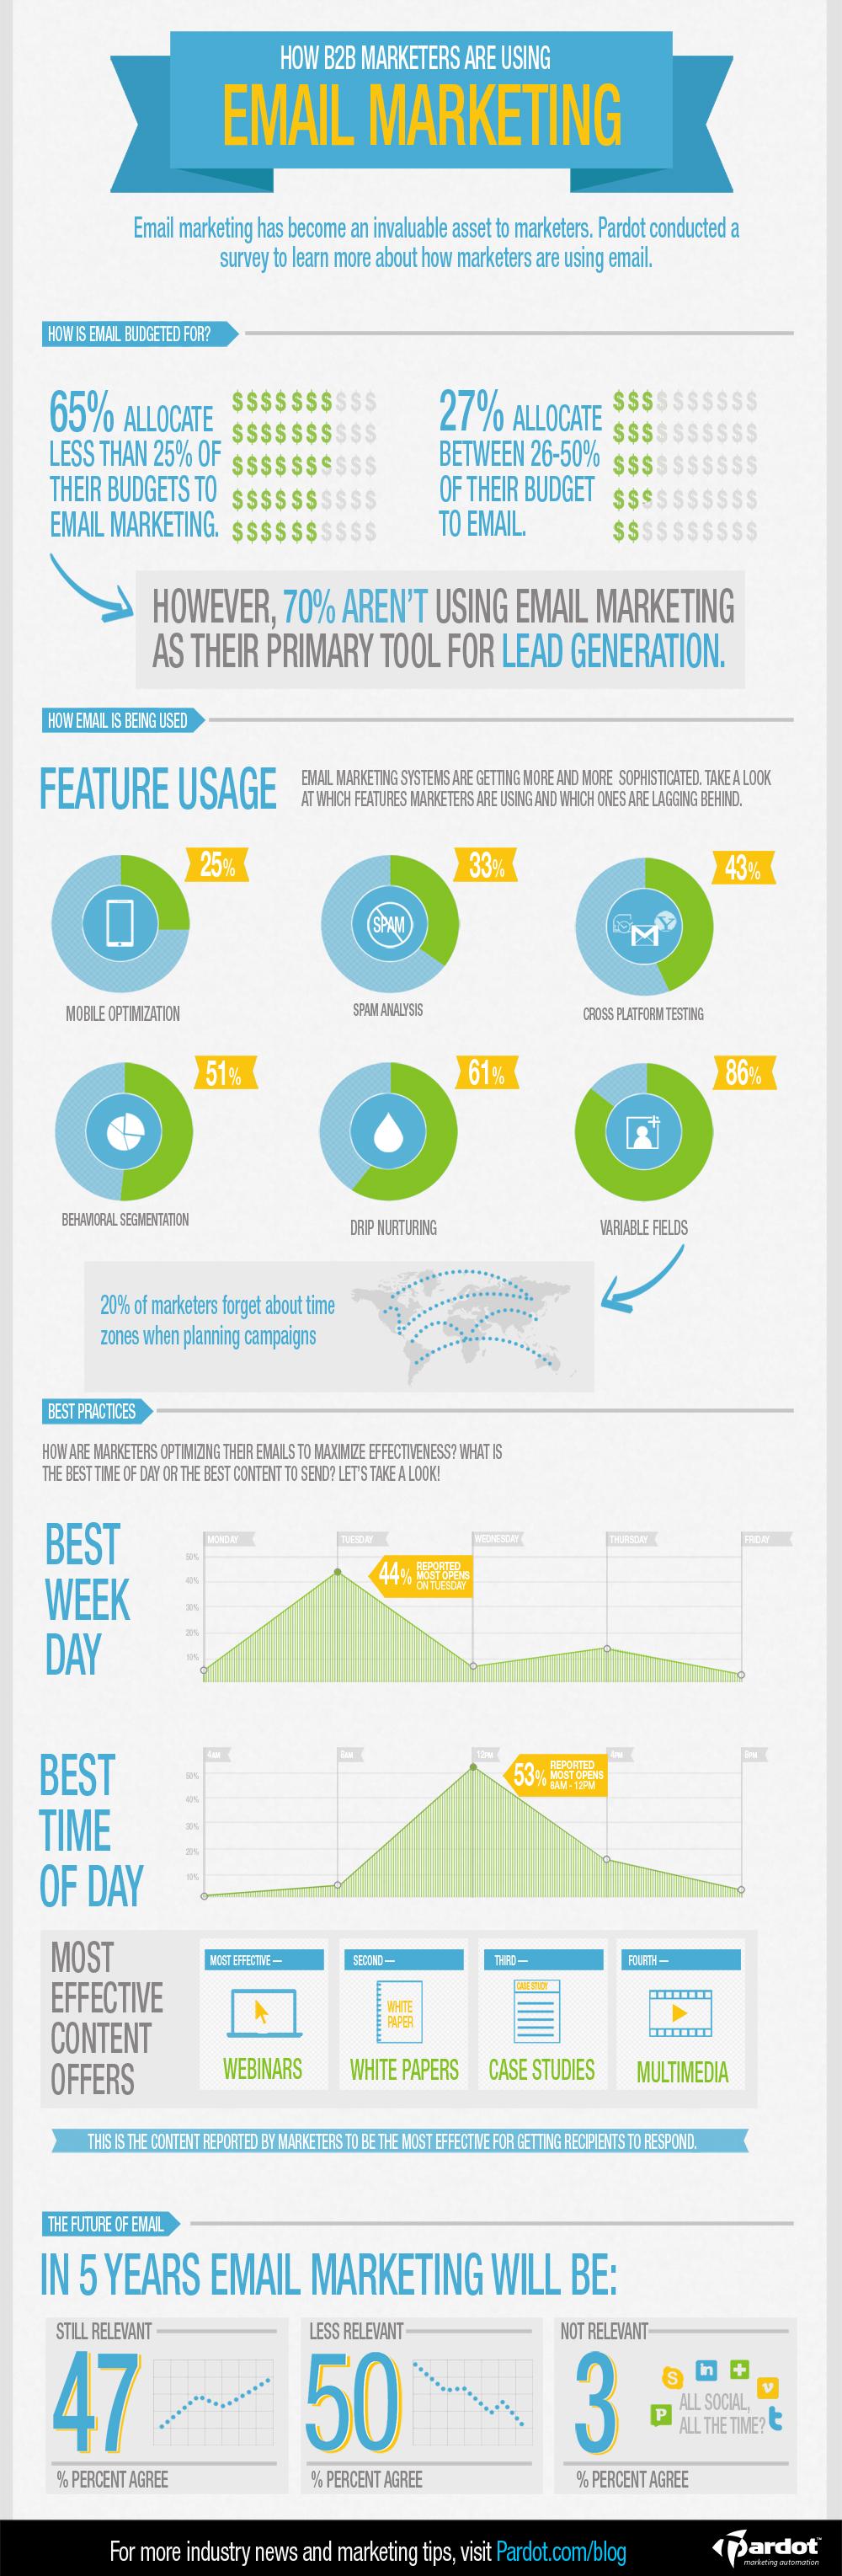 The Changing Role of Email Marketing [INFOGRAPHIC] - Pardot Infographic